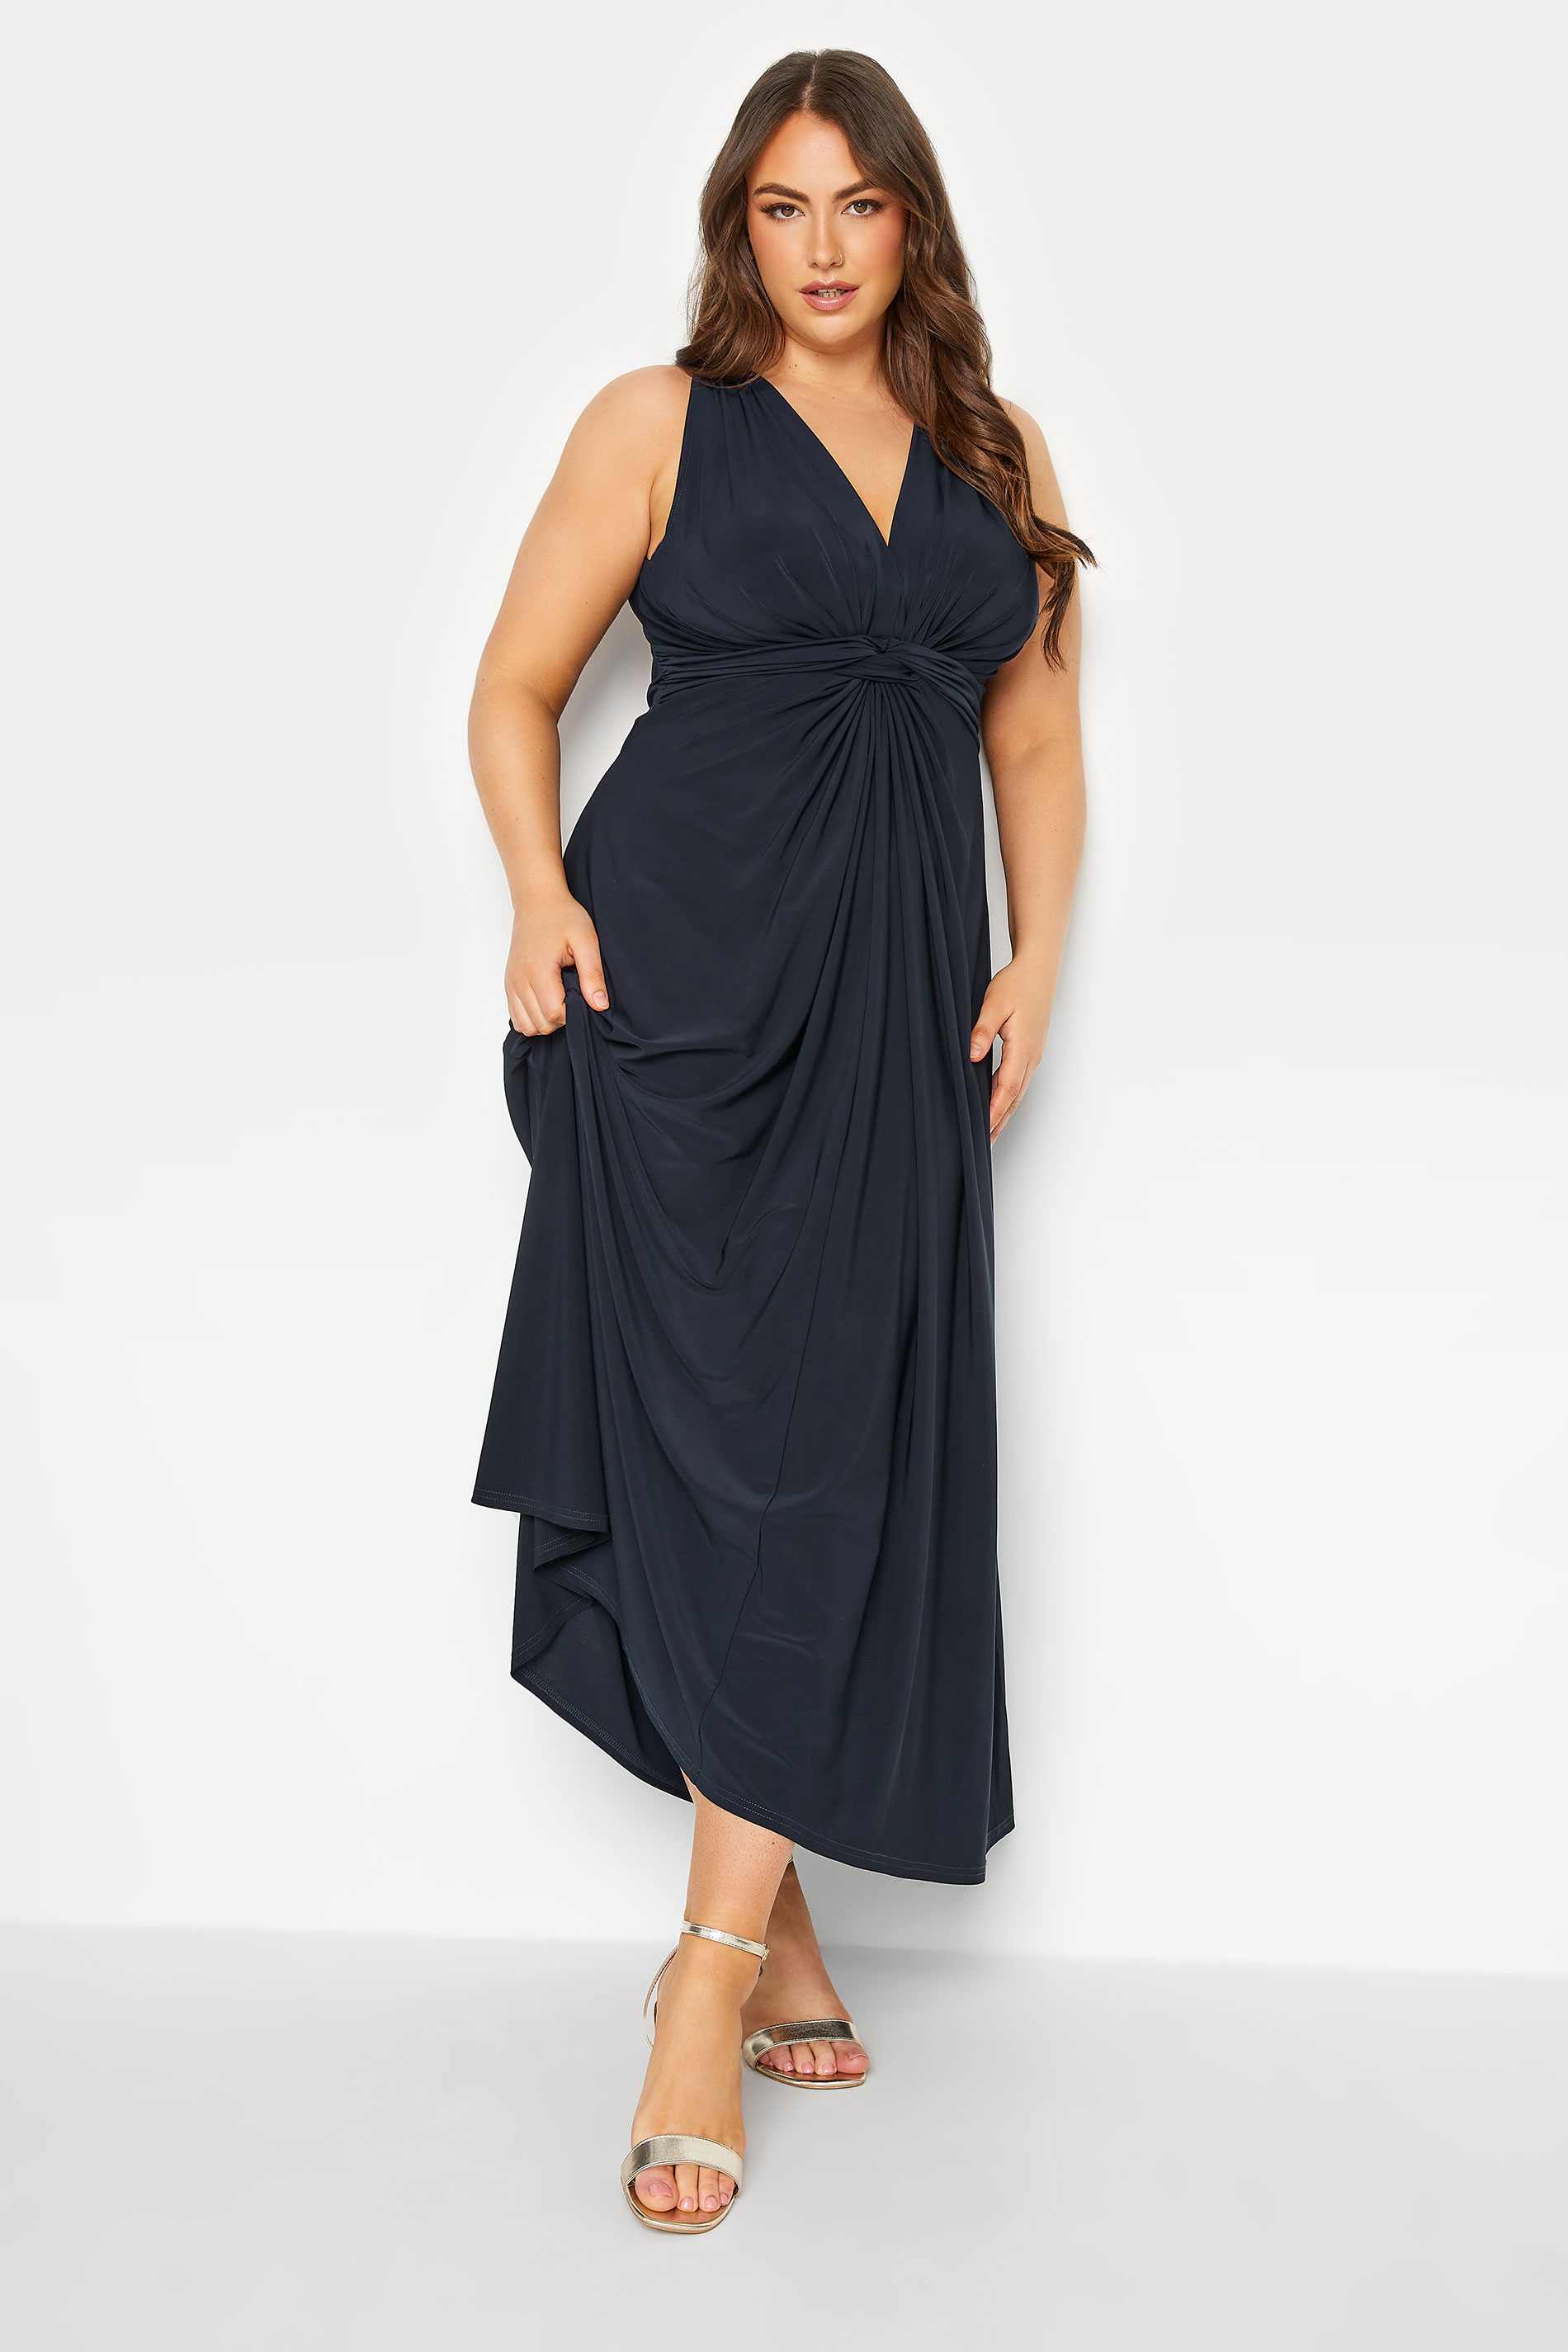 YOURS LONDON Plus Size Navy Blue Knot Front Maxi Dress | Yours Clothing  2